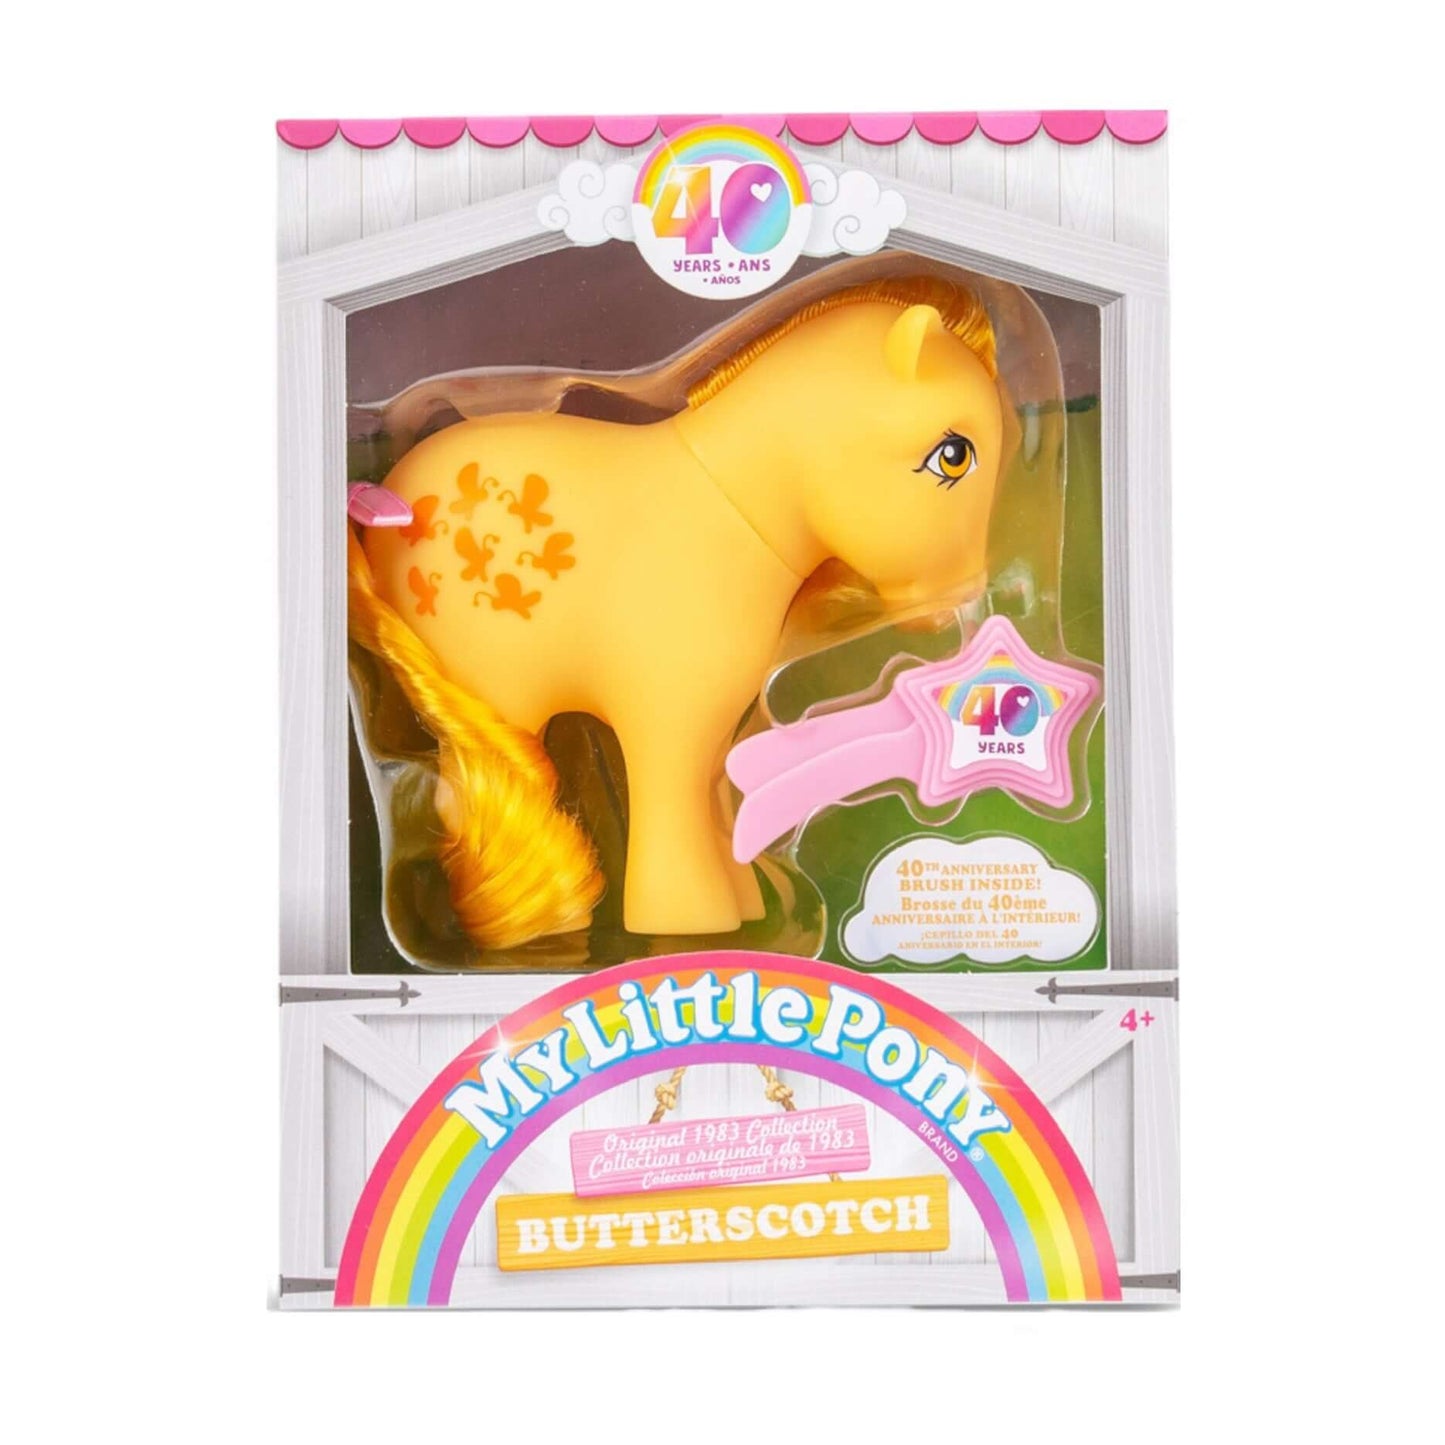 40th Anniversary Classic My Little Pony- G1 Butterscotch